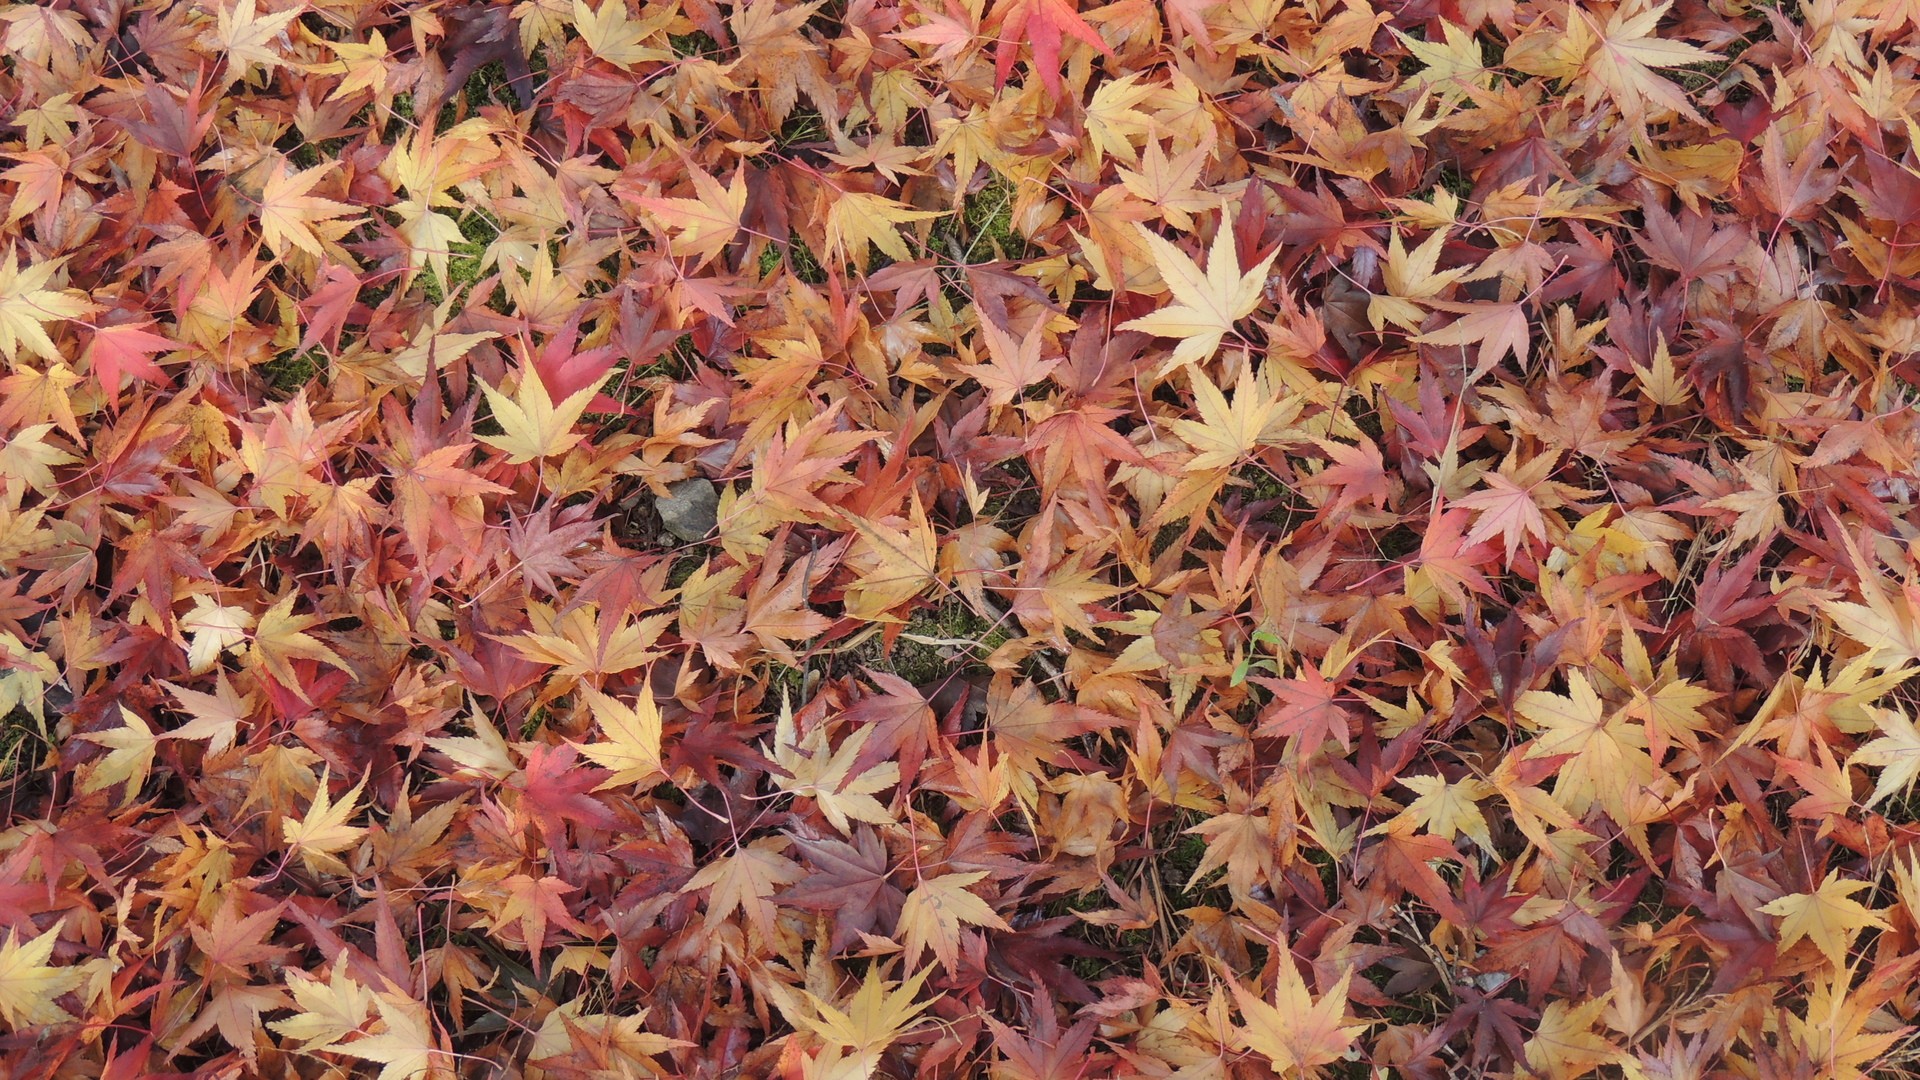 General 1920x1080 leaves fall maple leaves ground fallen leaves outdoors plants